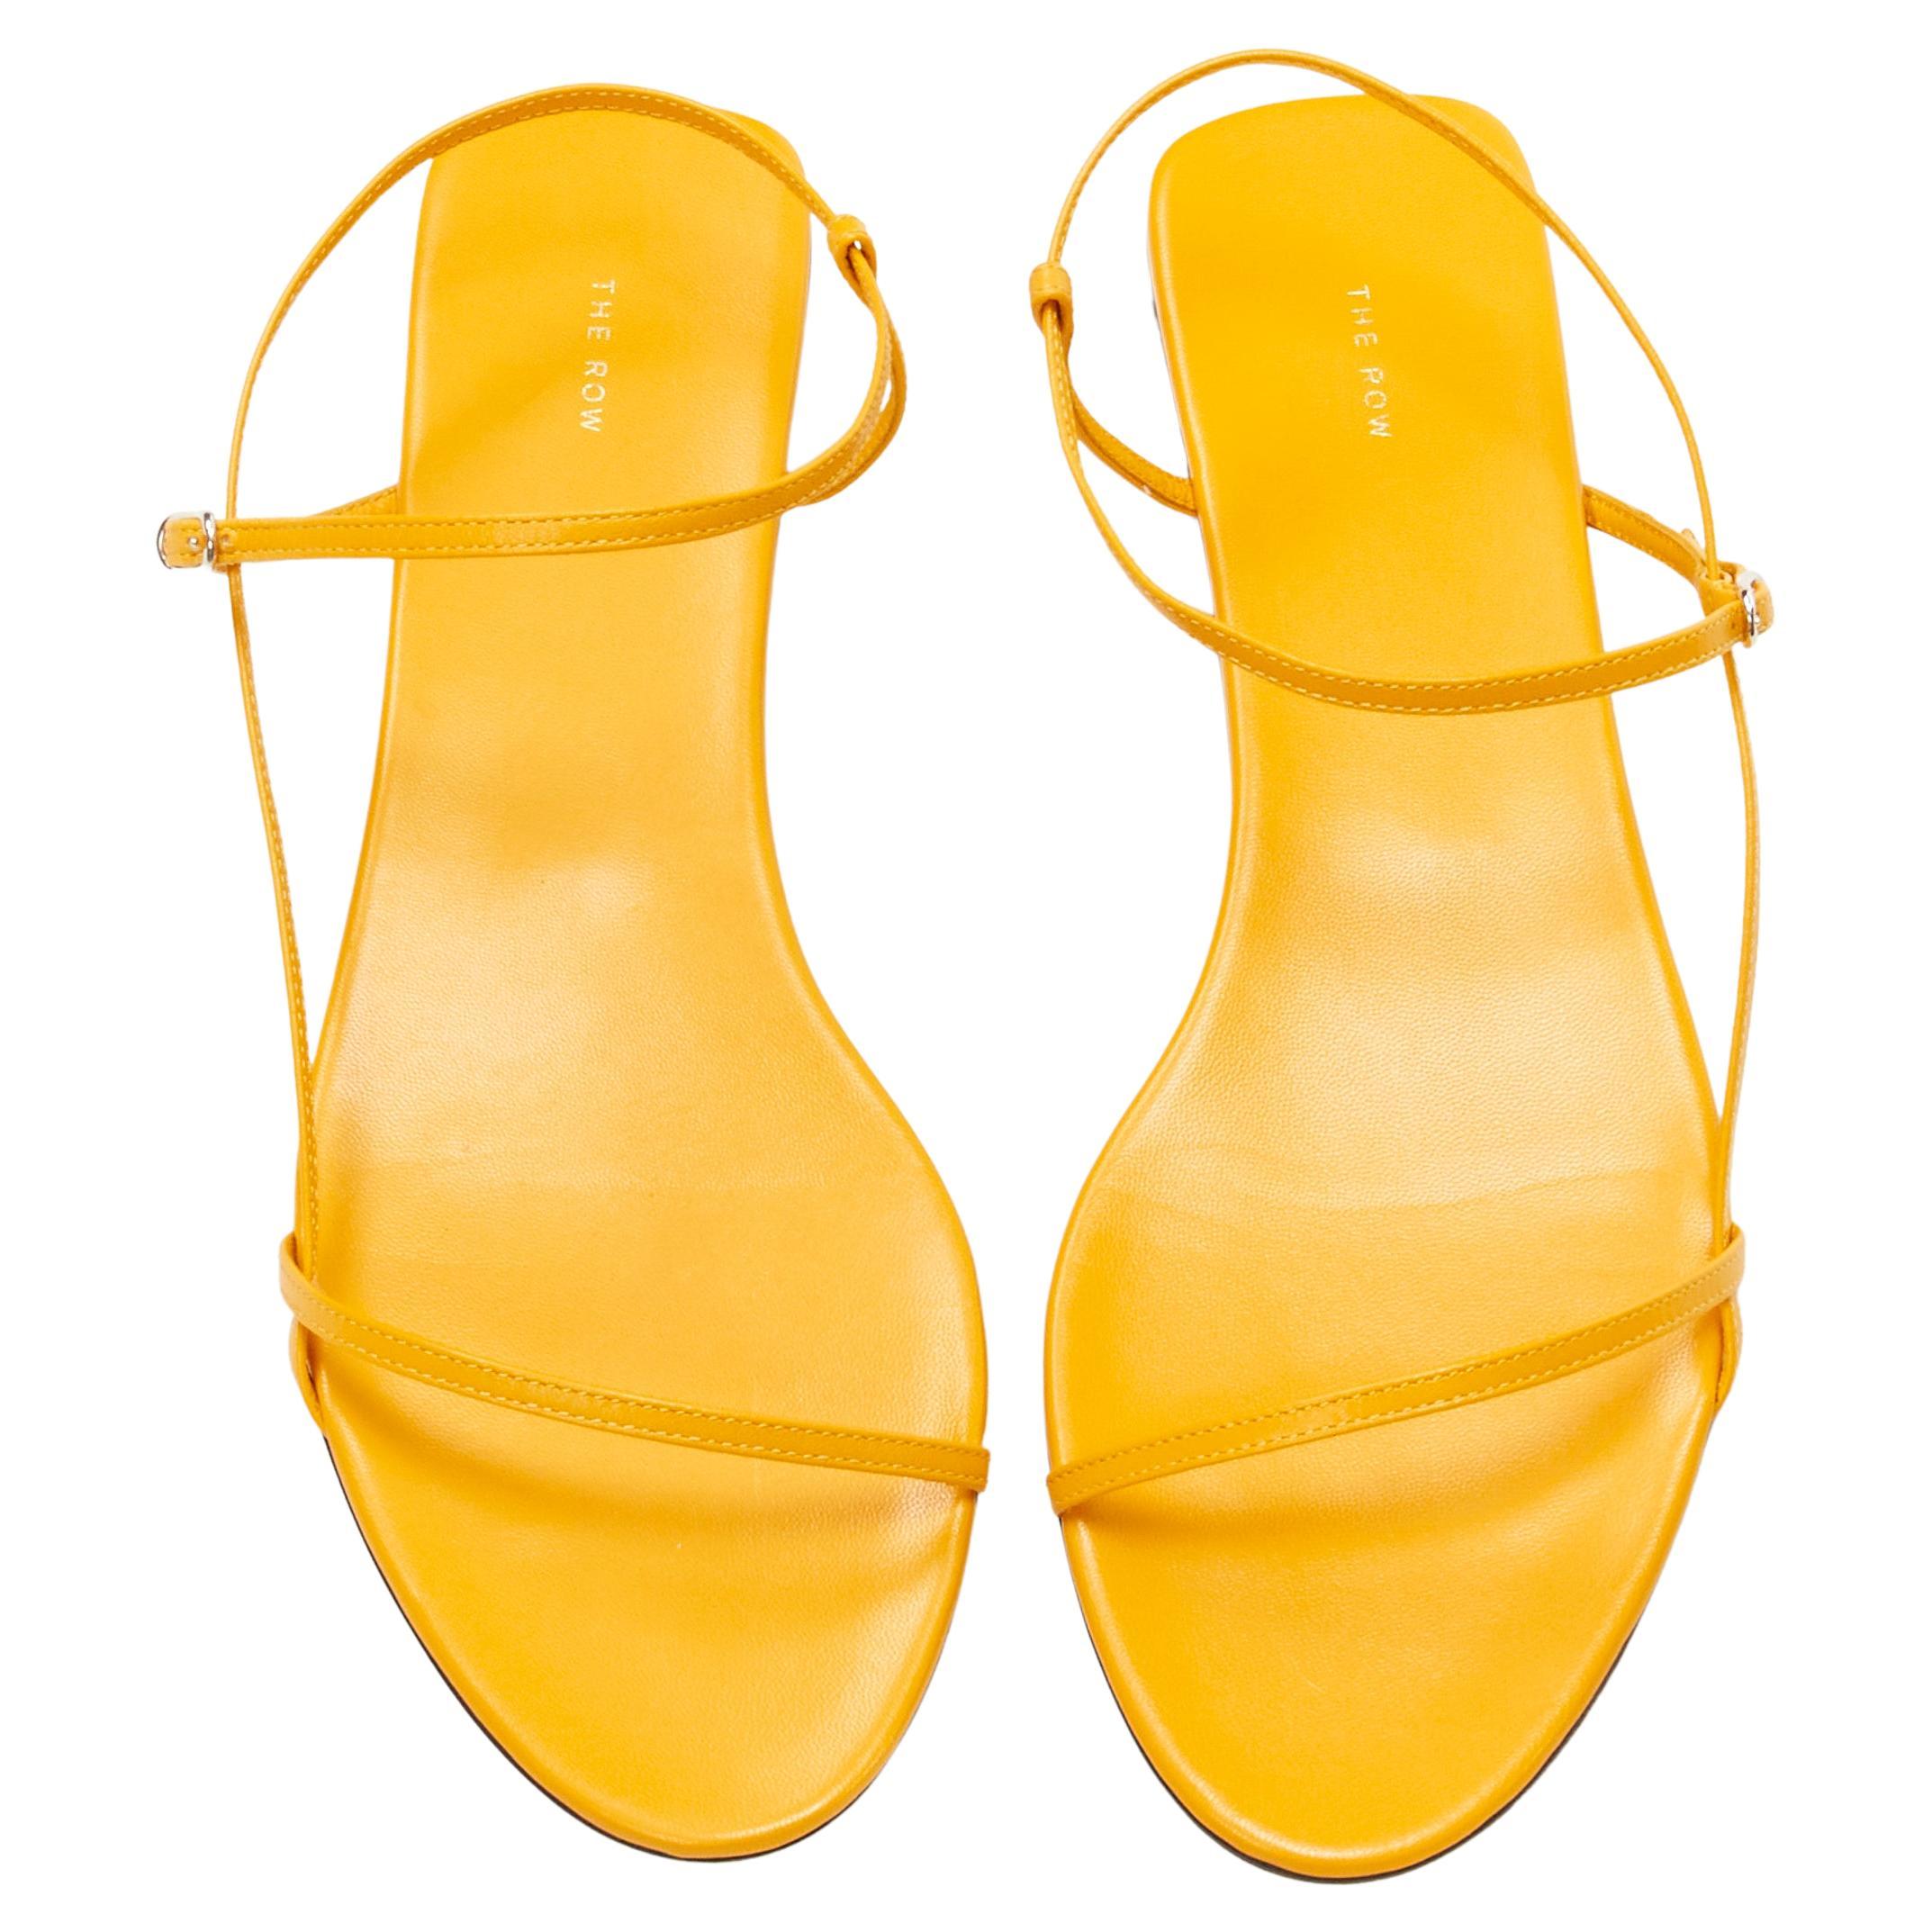 new THE ROW Bare Flat Sandal  mustard yellow kid leather minimal slides EU37.5
Brand: The Row
Designer: Mary Kate and Ashley Olsen
Model: Flat Bare Sandal
Material: Leather
Color: Yellow
Pattern: Solid
Closure: Ankle Strap
Extra Detail: Designer